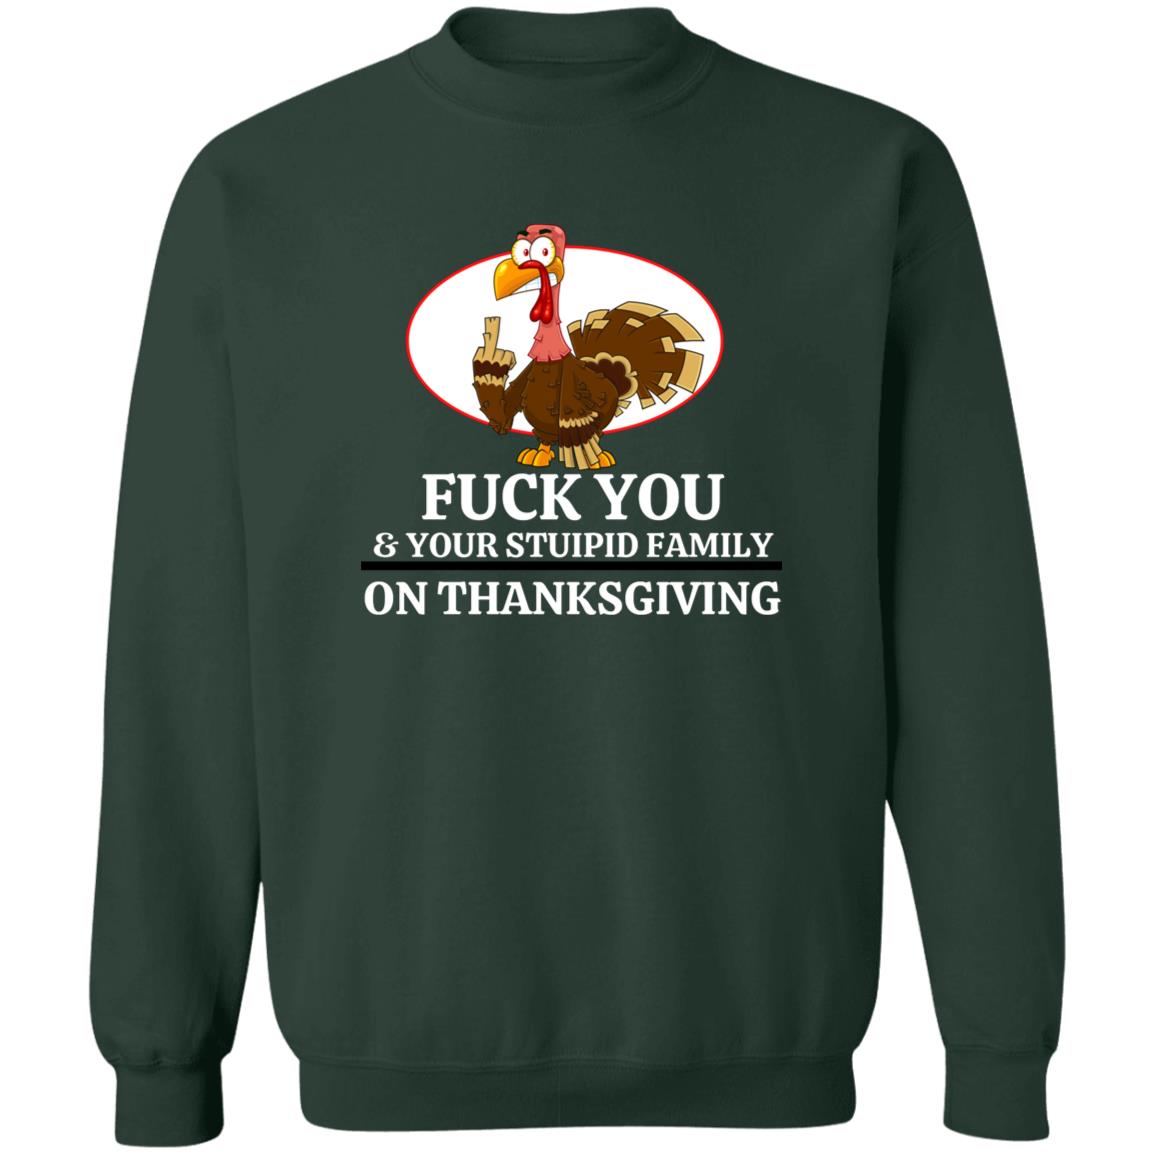 Anti-Social Thanksgiving Pull Over Sweat Shirt, Punk Rock Angry Turkey Offensive Holiday Shirt